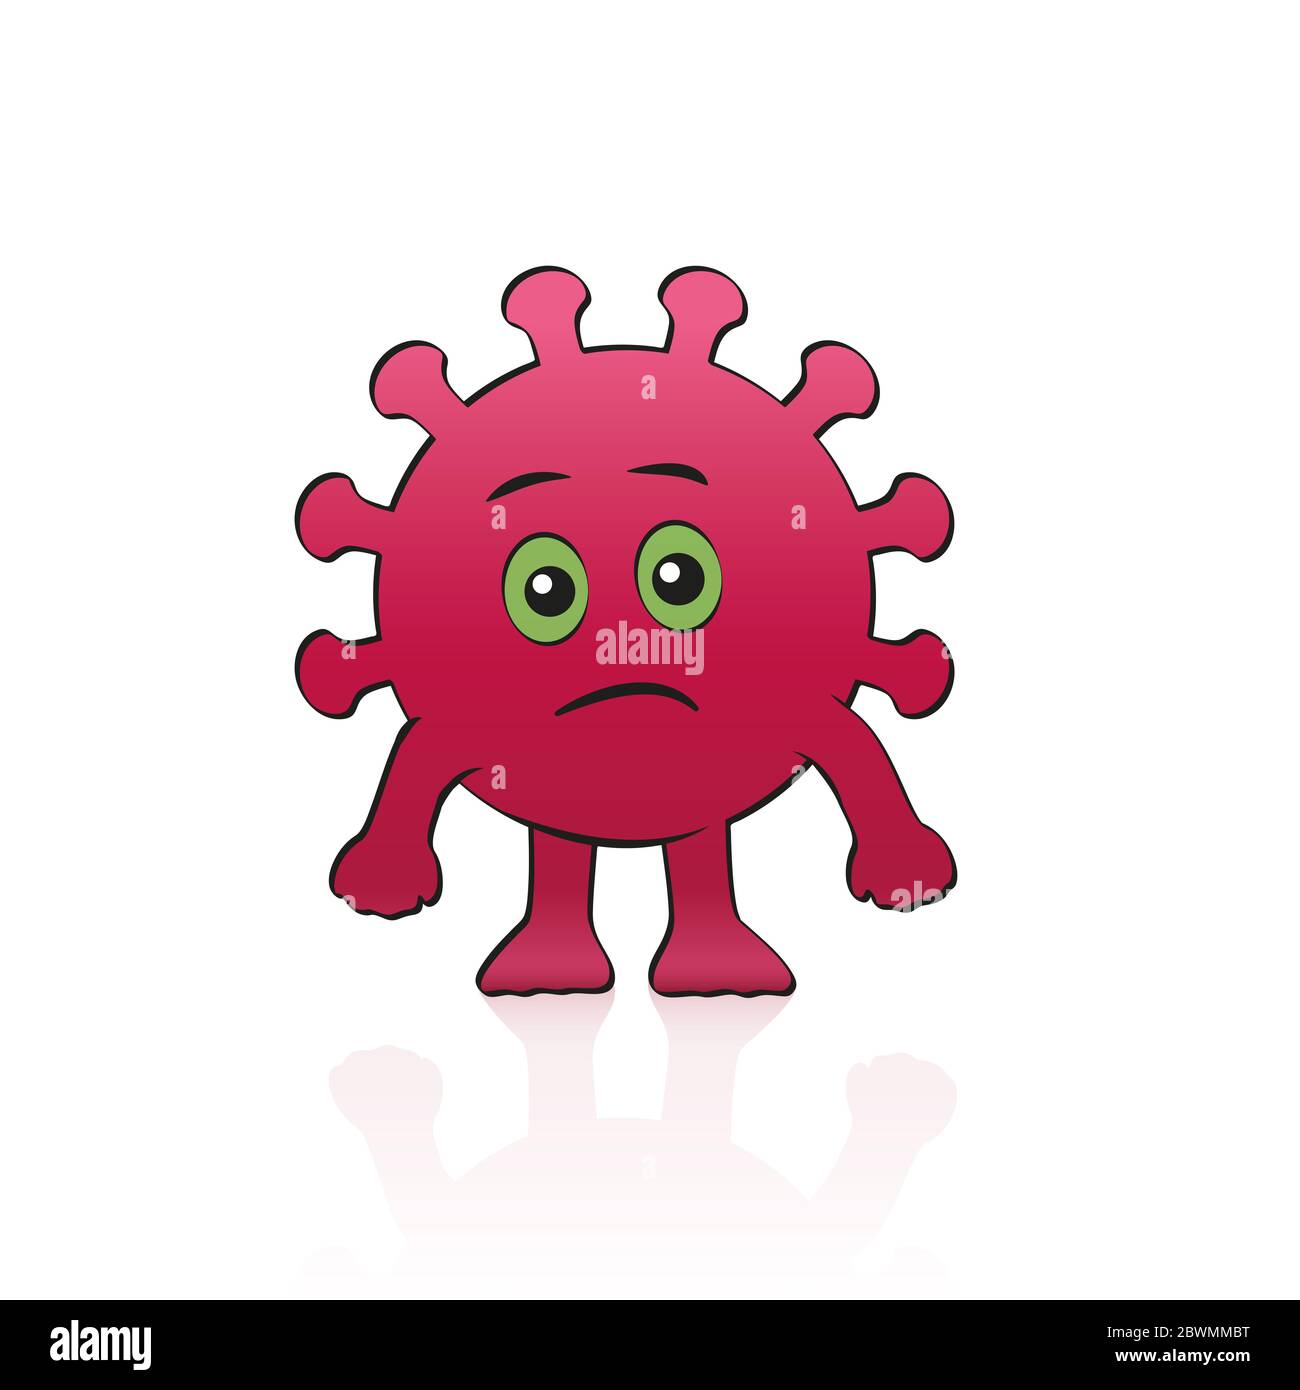 Coronavirus comic figure. Sad covid character with eyes, mouth, hands and feet - illustration on white background. Stock Photo